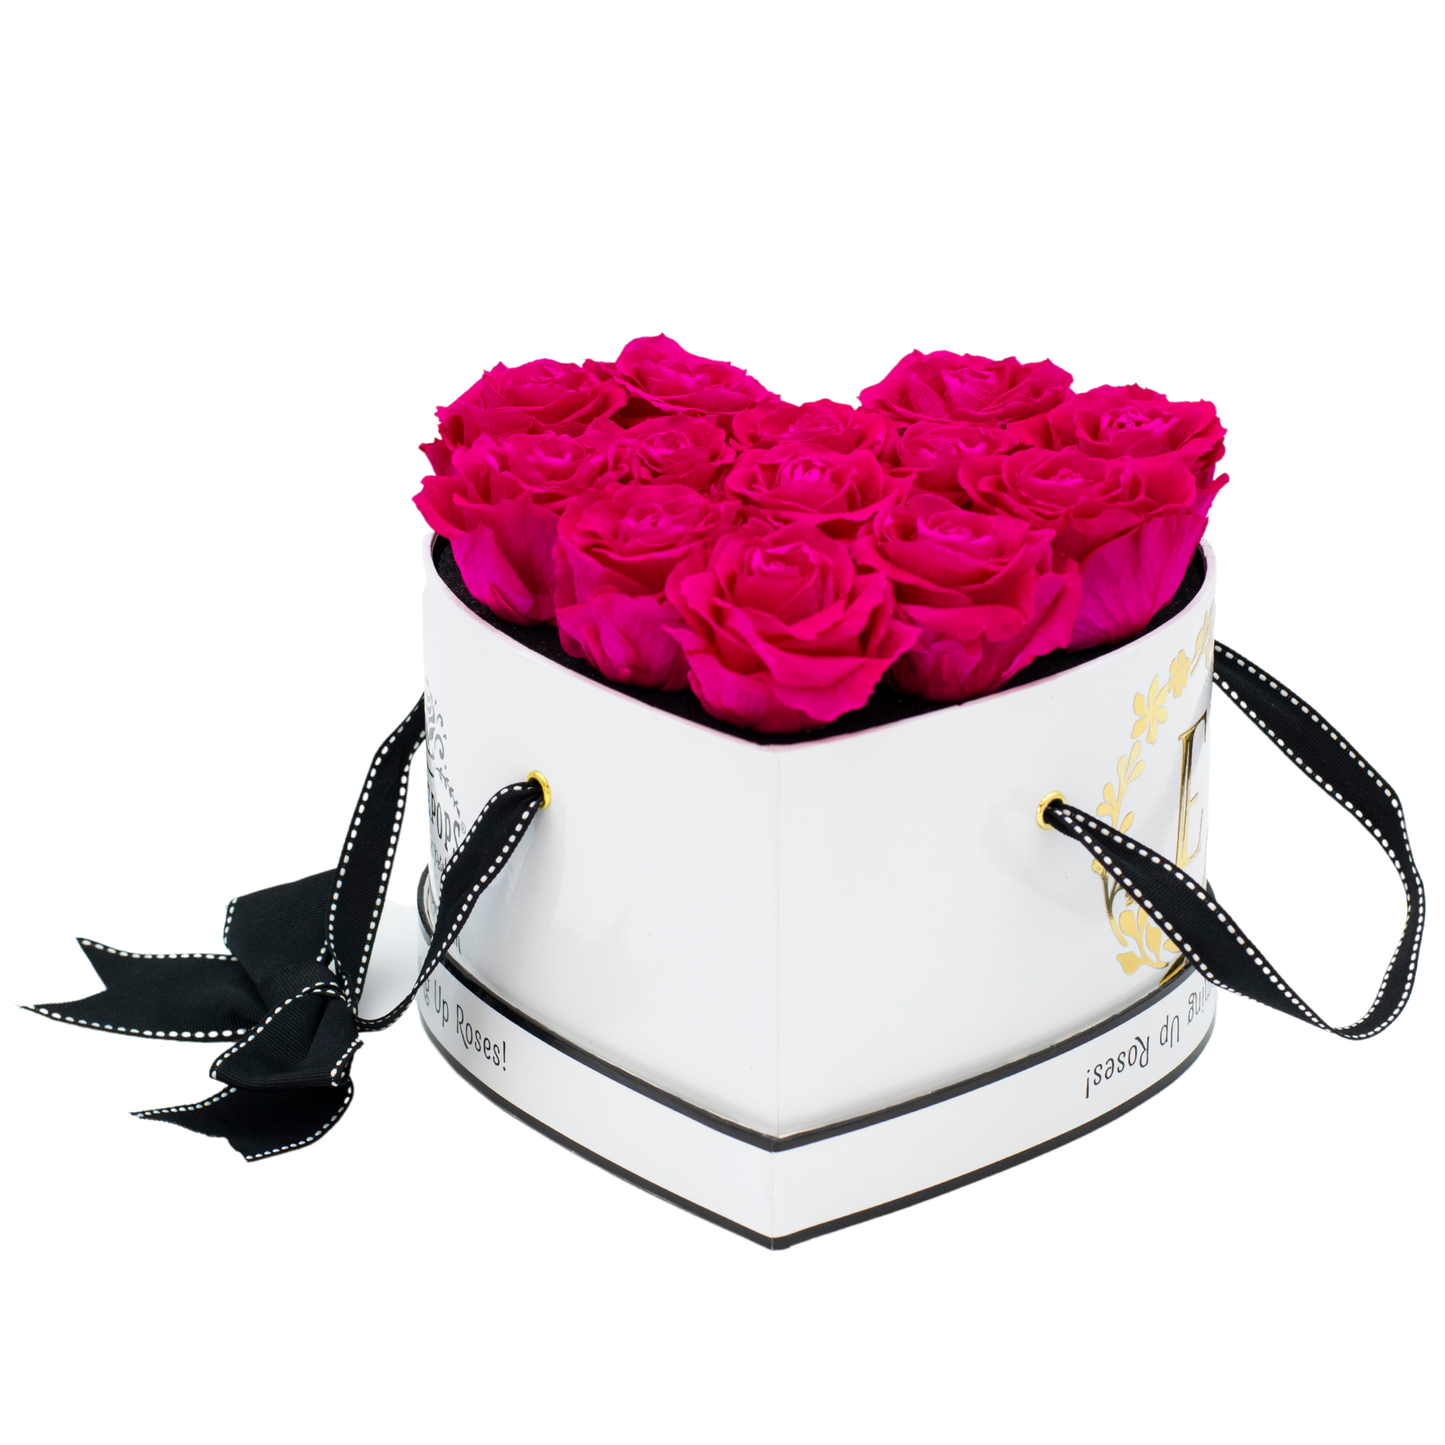 The White Monogrammed Lucky 13 - Raspberry Punch Roses